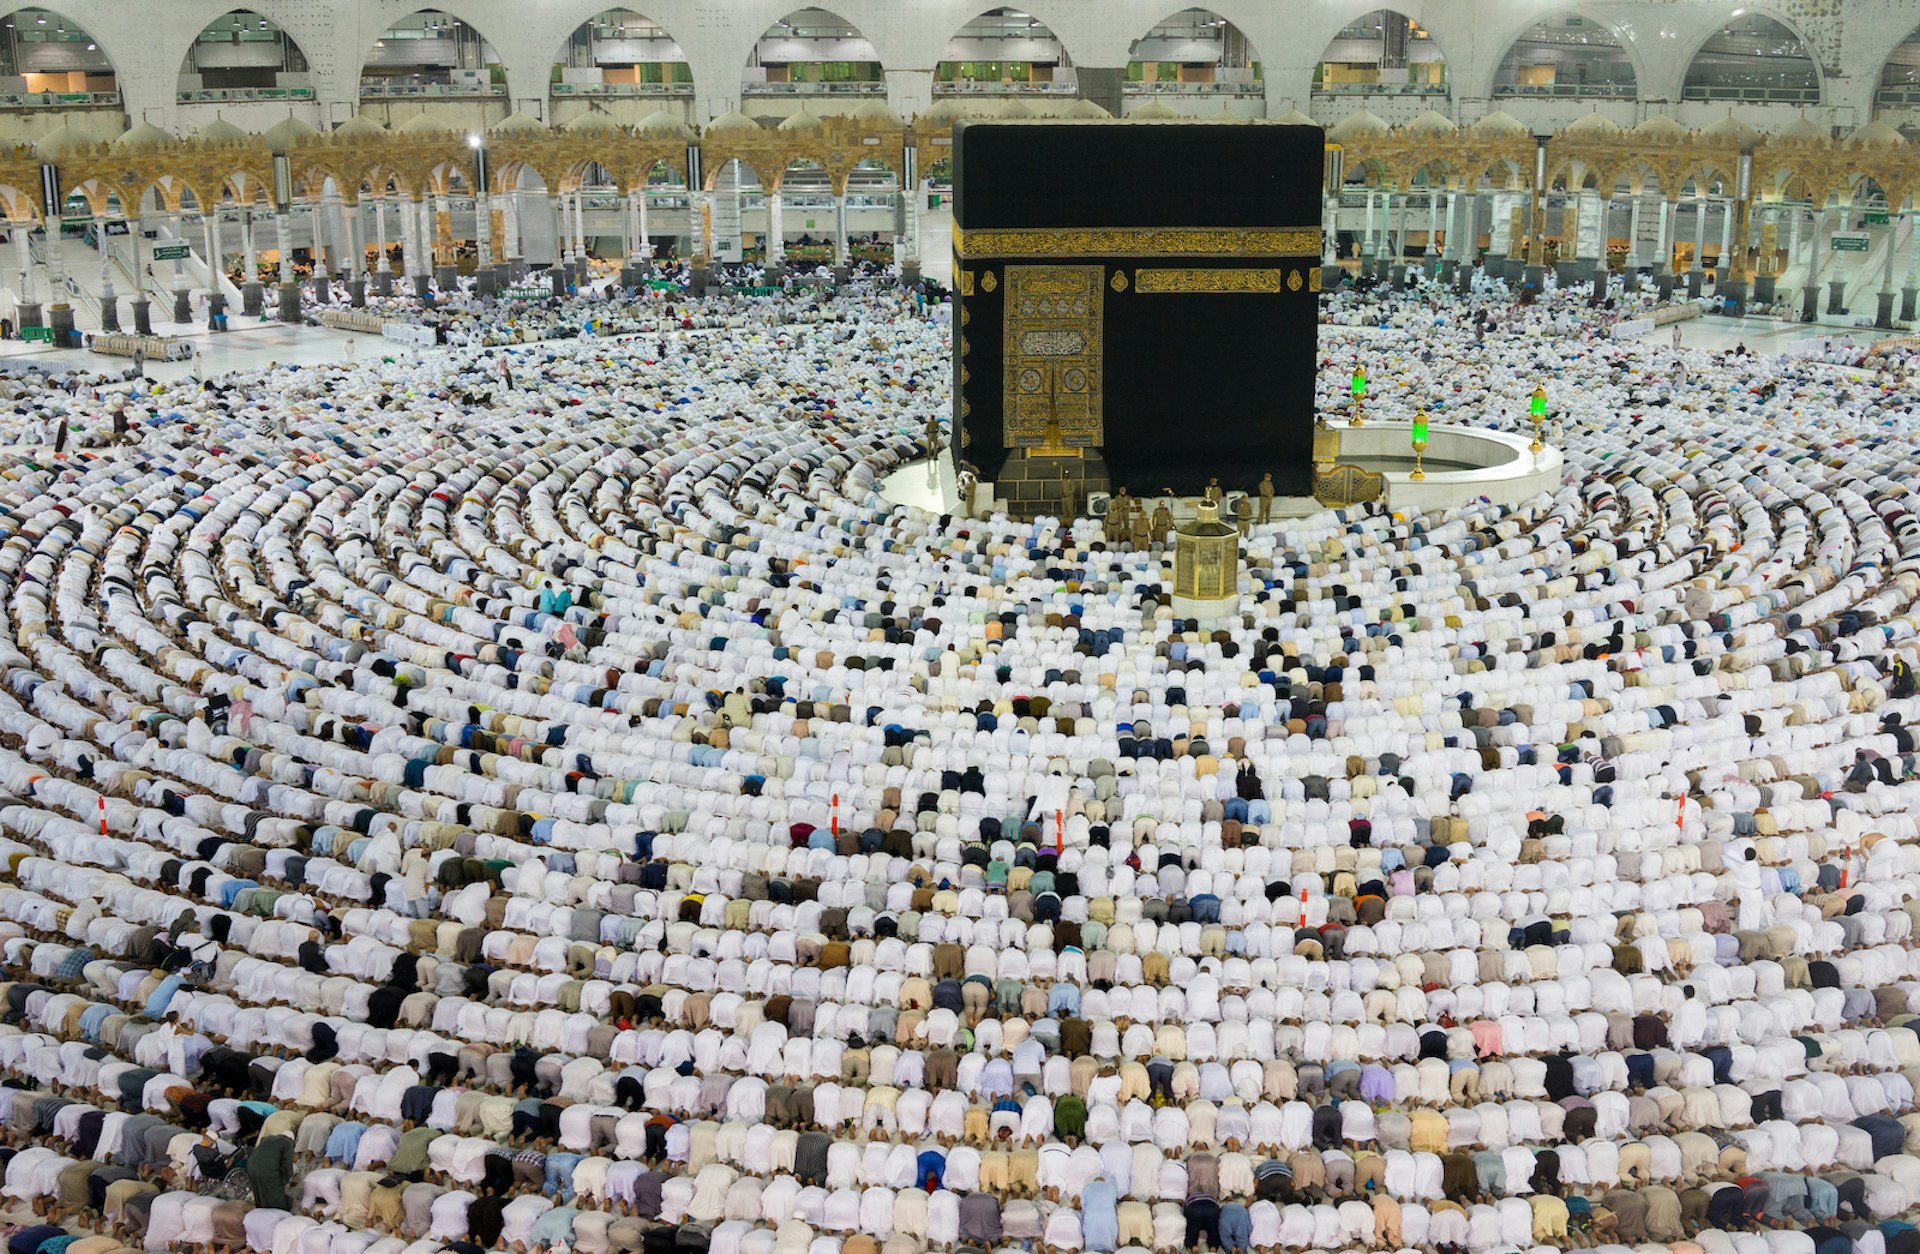 Thousands of Muslims are kneeling in concentric circles around the Kaaba at the The Great Mosque in Mecca. The Kaaba is a large black stone cube with ornate gold details. The majority of the worshippers are wearing white. 